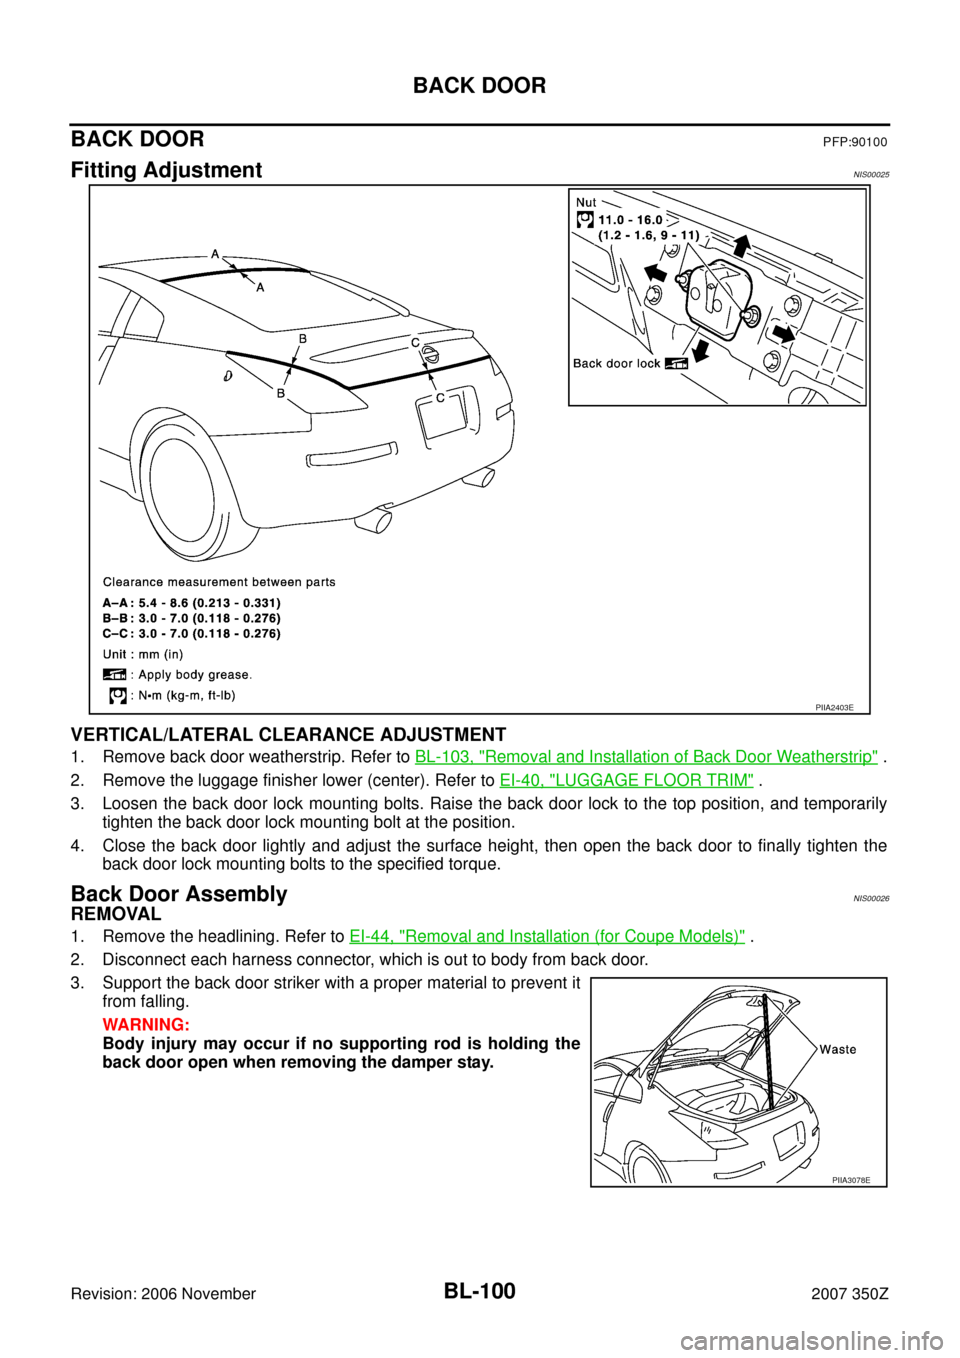 NISSAN 350Z 2007 Z33 Body, Lock And Security System Owners Manual BL-100
BACK DOOR
Revision: 2006 November2007 350Z
BACK DOORPFP:90100
Fitting AdjustmentNIS00025
VERTICAL/LATERAL CLEARANCE ADJUSTMENT
1. Remove back door weatherstrip. Refer to BL-103, "Removal and In